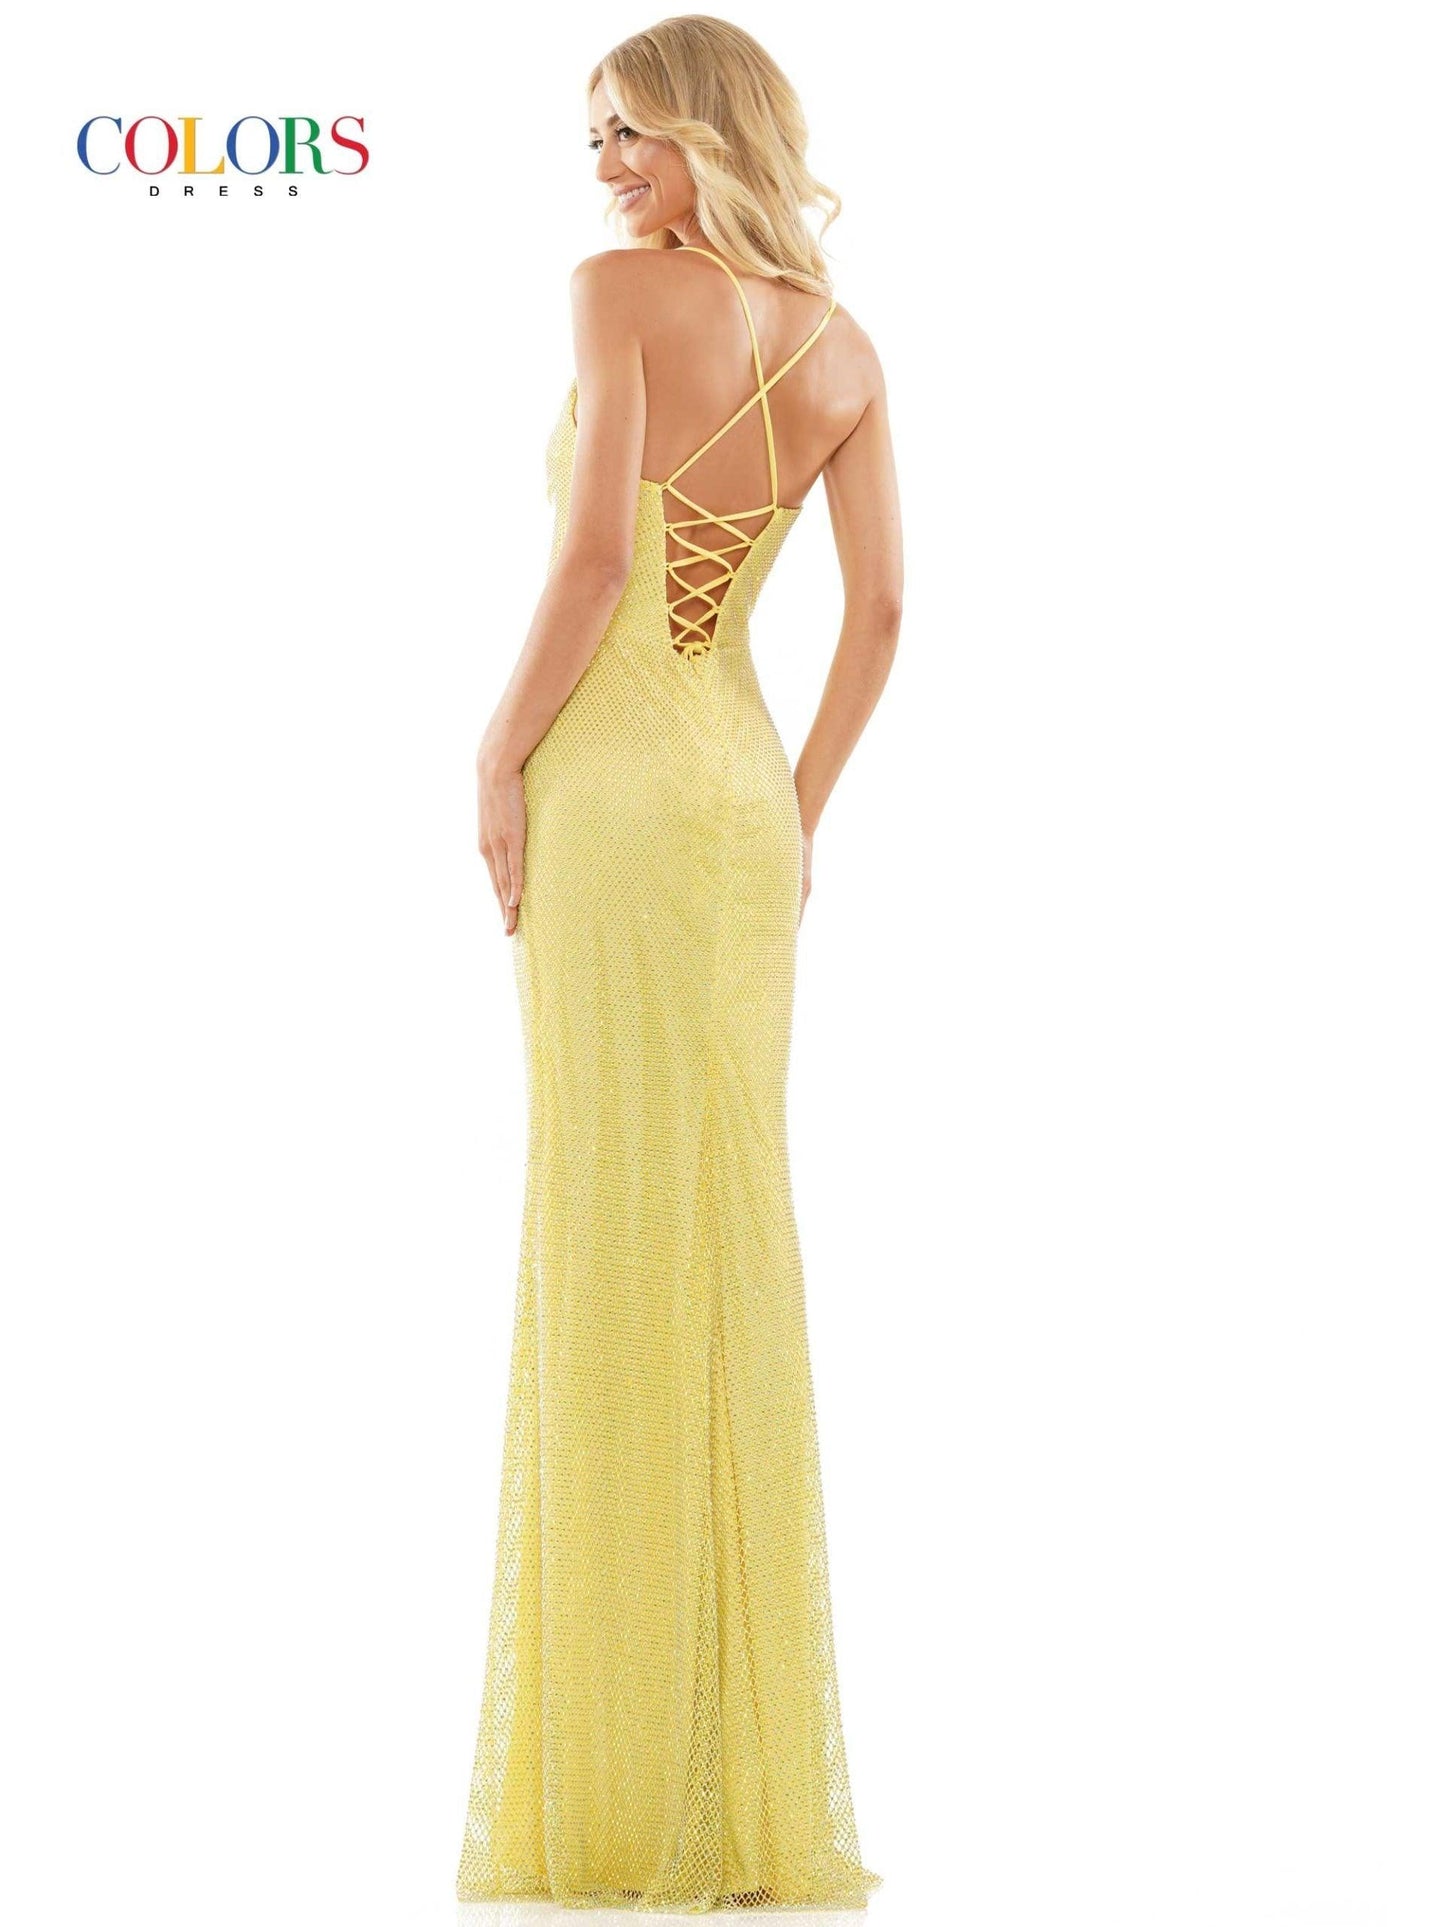 Colors Spaghetti Strap Long Prom Dress 2859 - The Dress Outlet